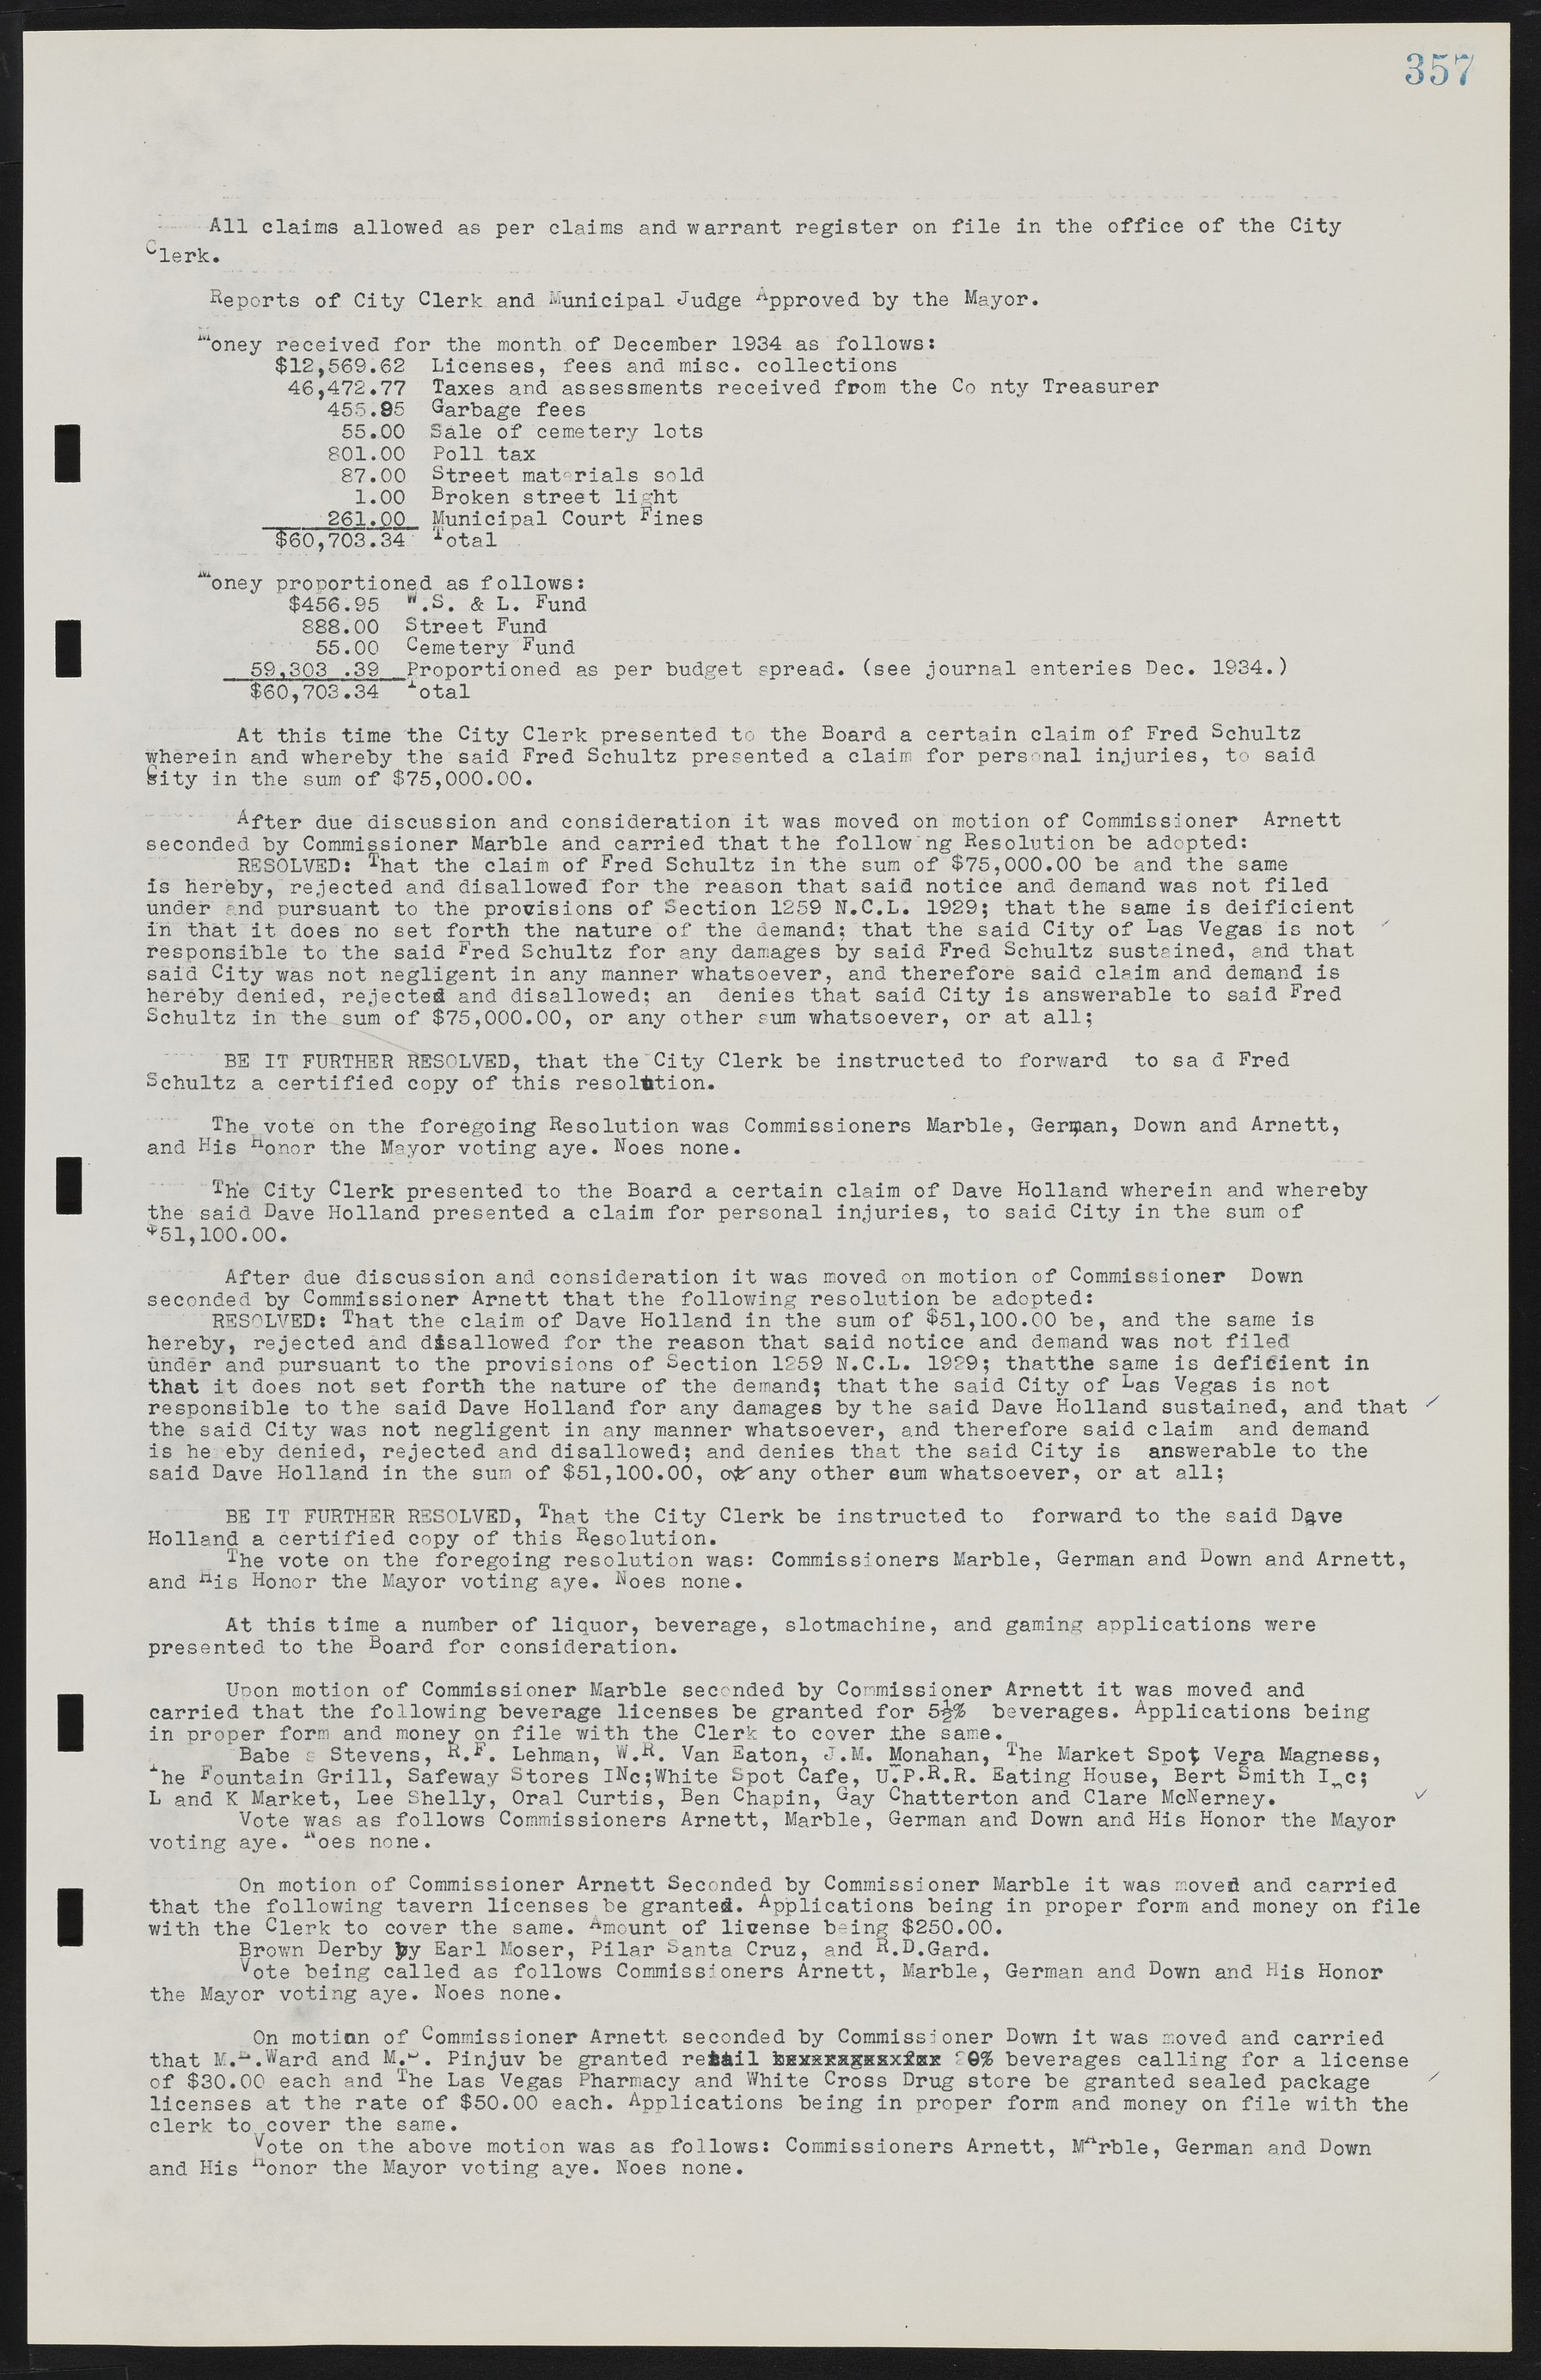 Las Vegas City Commission Minutes, May 14, 1929 to February 11, 1937, lvc000003-364